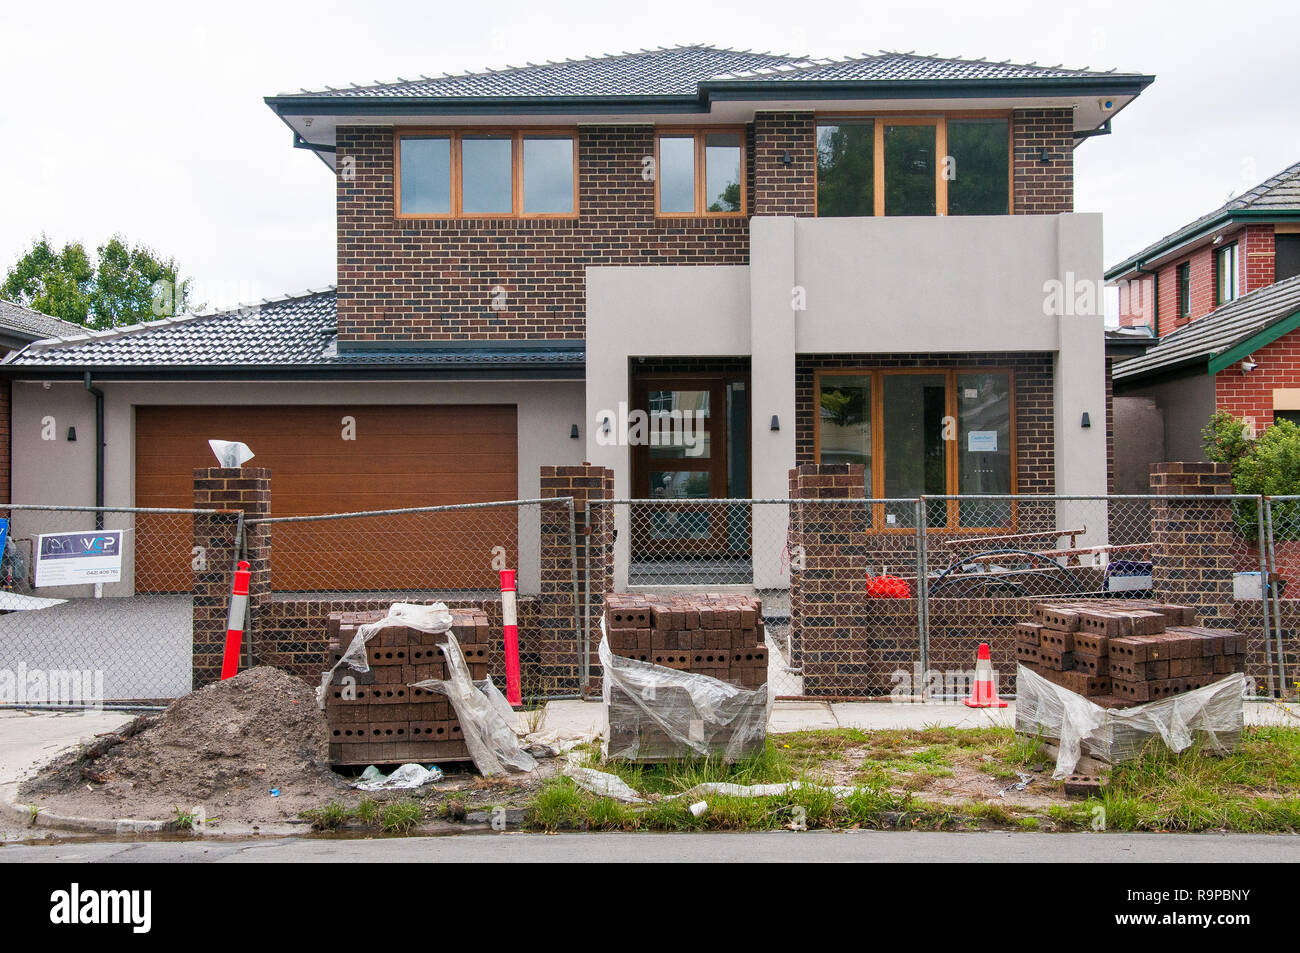 Newly-built suburban family home, awaiting a final clean up. Caulfield, Melbourne, Australia. New home completions are an economic indicator. Stock Photo